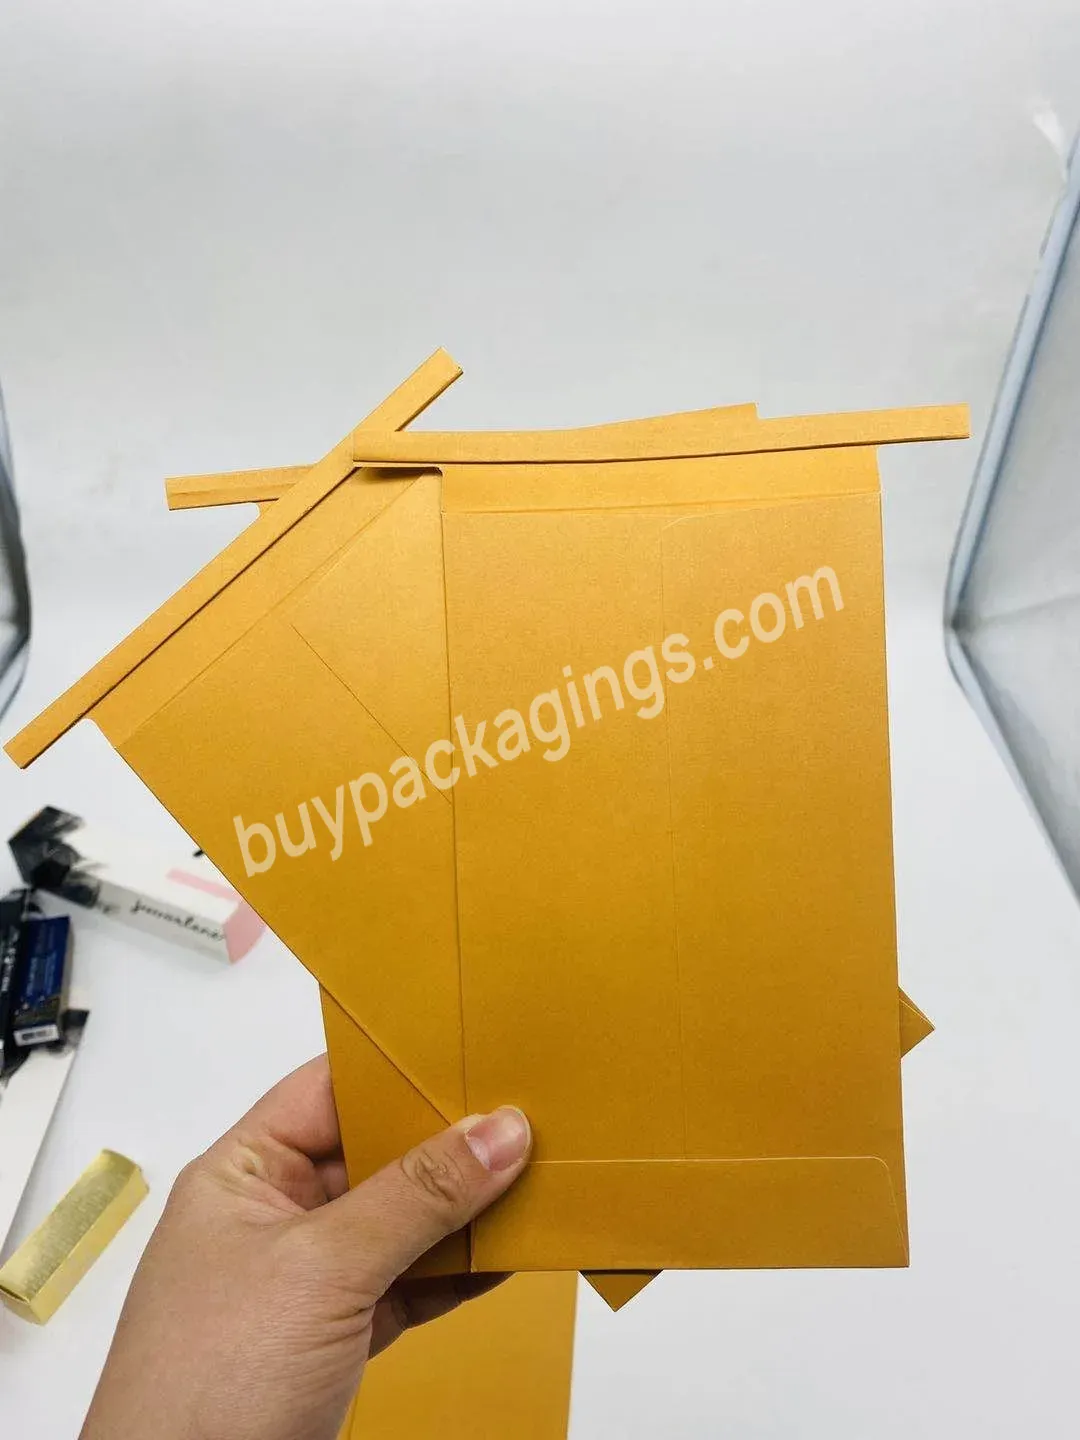 Customized Logo Packaging Envelope 4x7 Inch Reusable Laboratory Paper Packet Brown Kraft Sand Envelope With Tie Closure - Buy Paper Envelopes With Tin Tie Closure,Envelope With Tie,Laboratory Packaging Envelope With Tie.